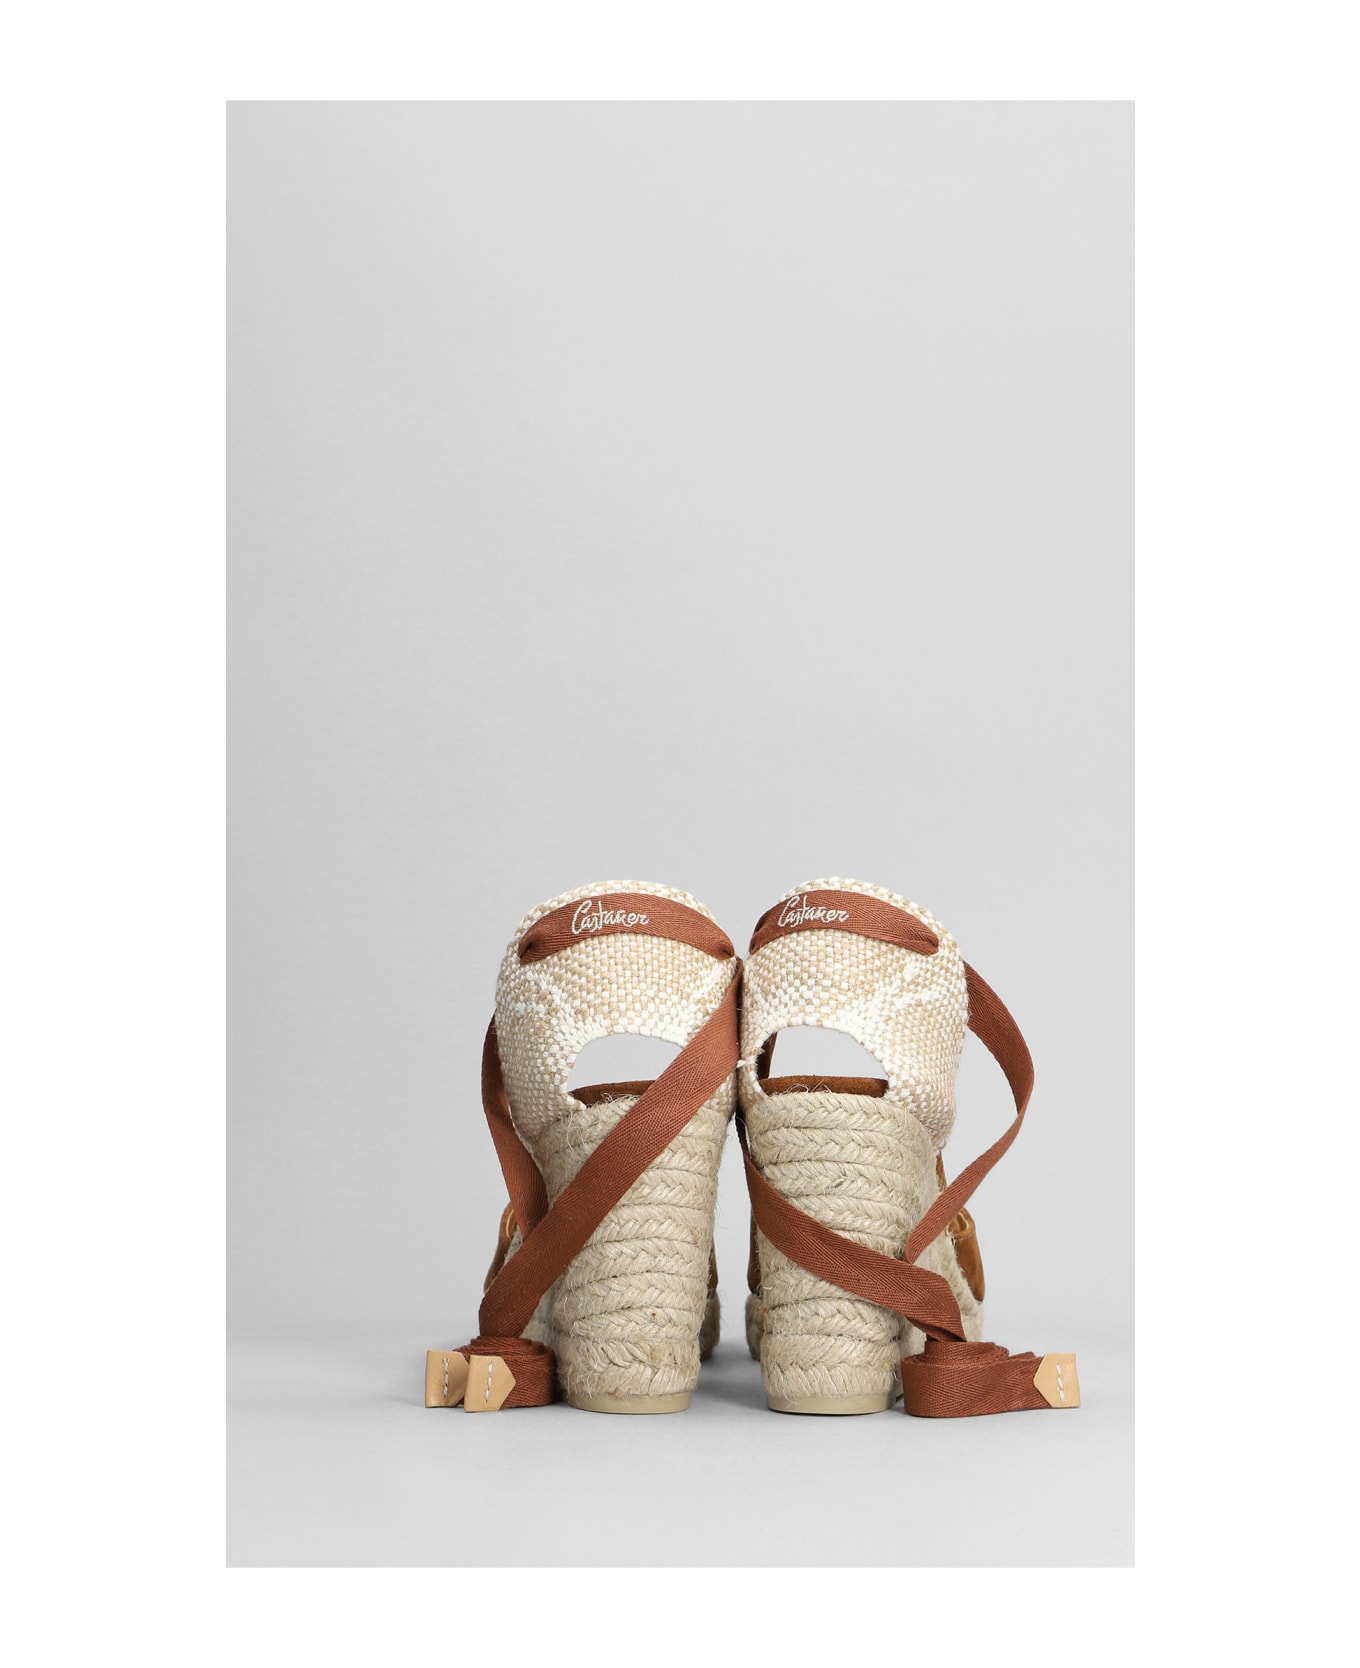 Castañer Cande-8-186 Wedges In Leather Color Suede - leather color